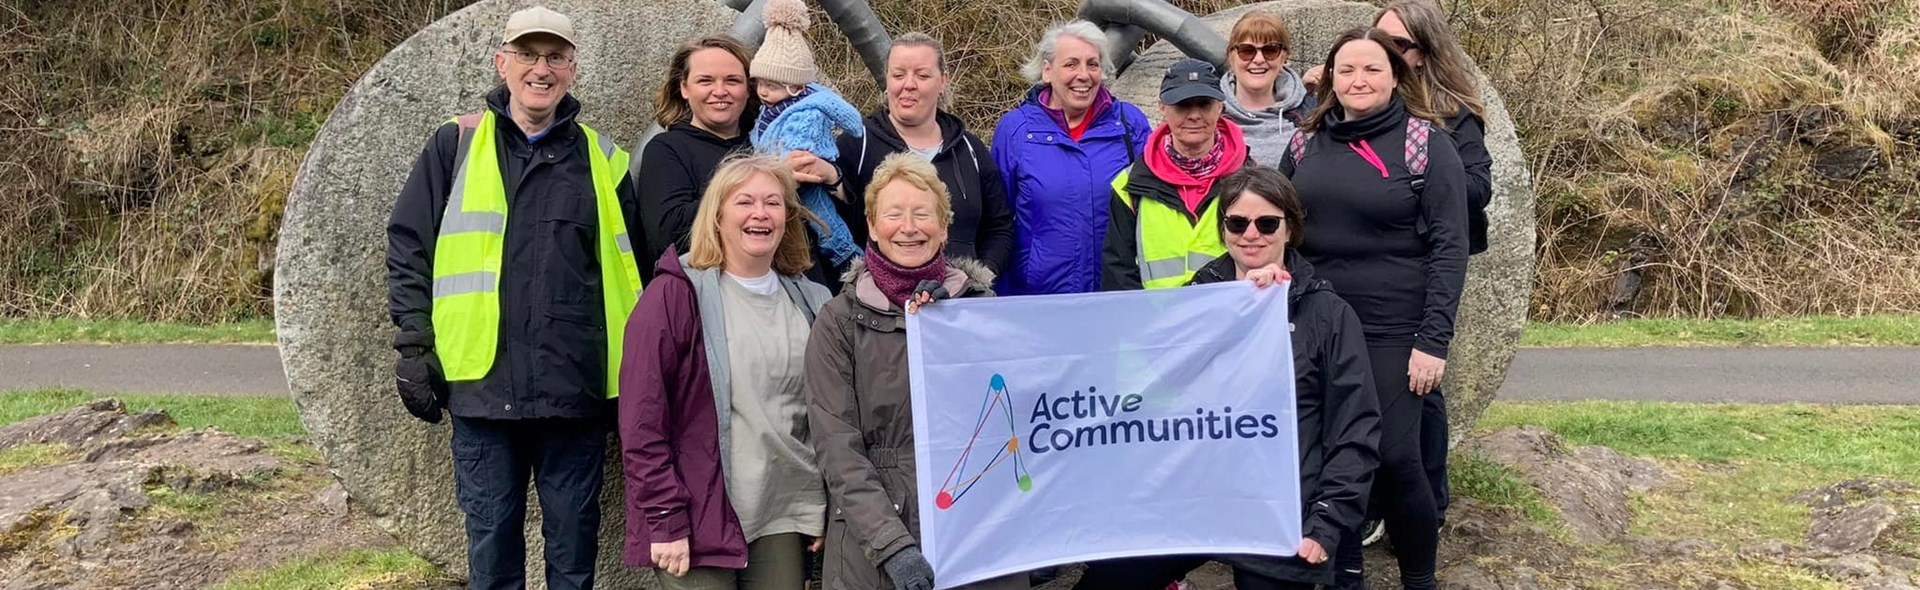 Fundraise for Active Communities